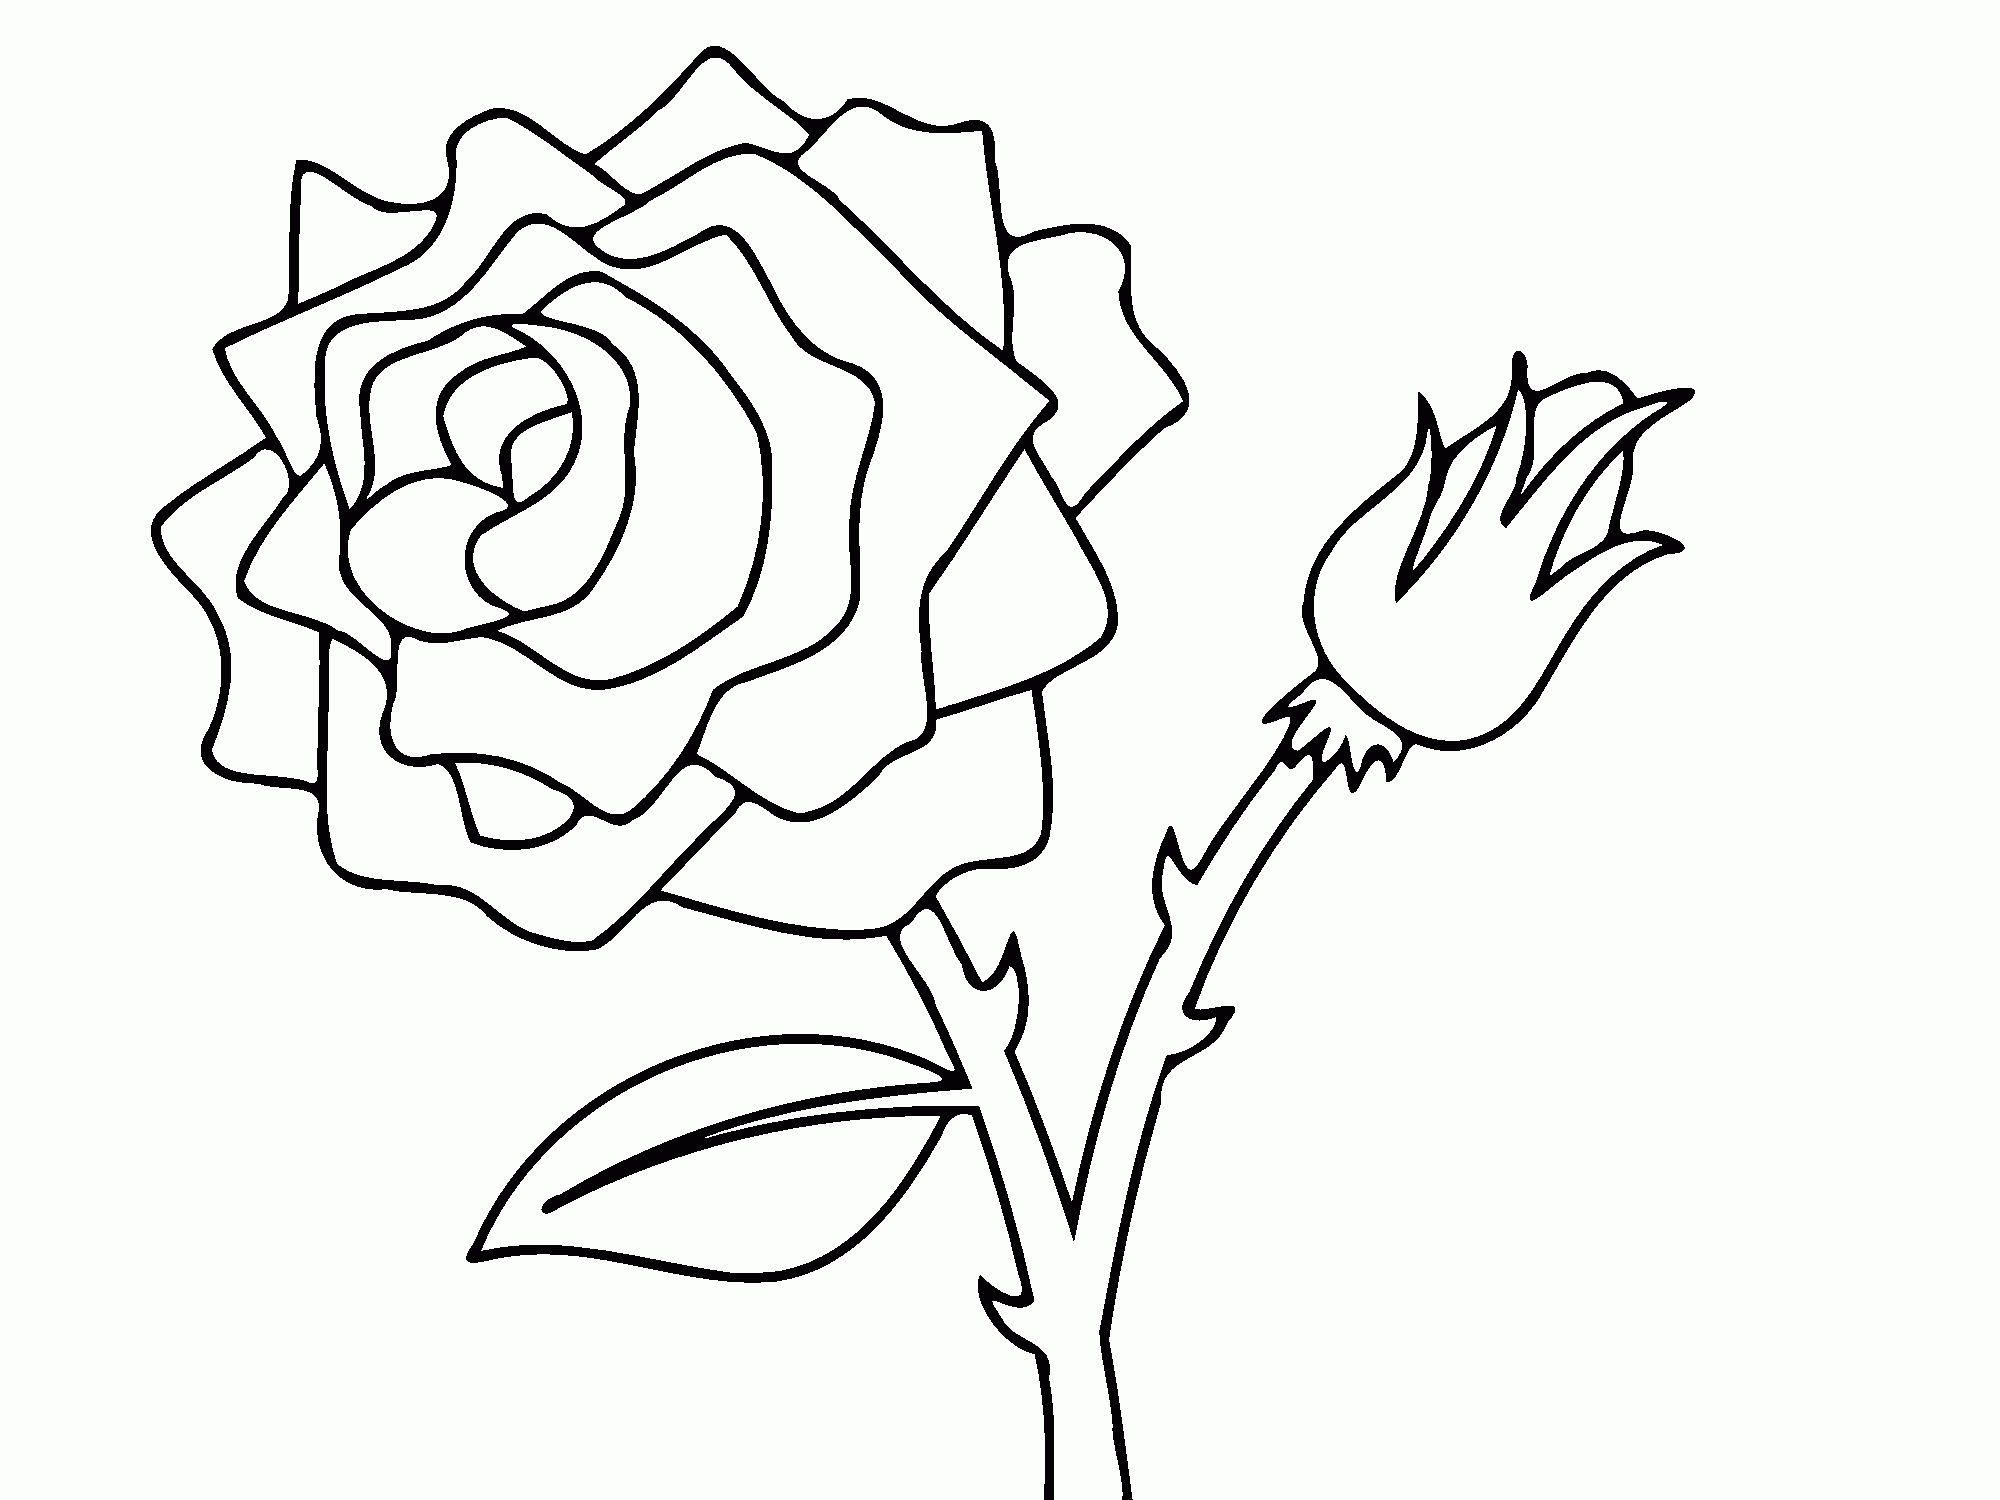 Roses Are Red Violets Are Blue Coloring Page Coloring Home